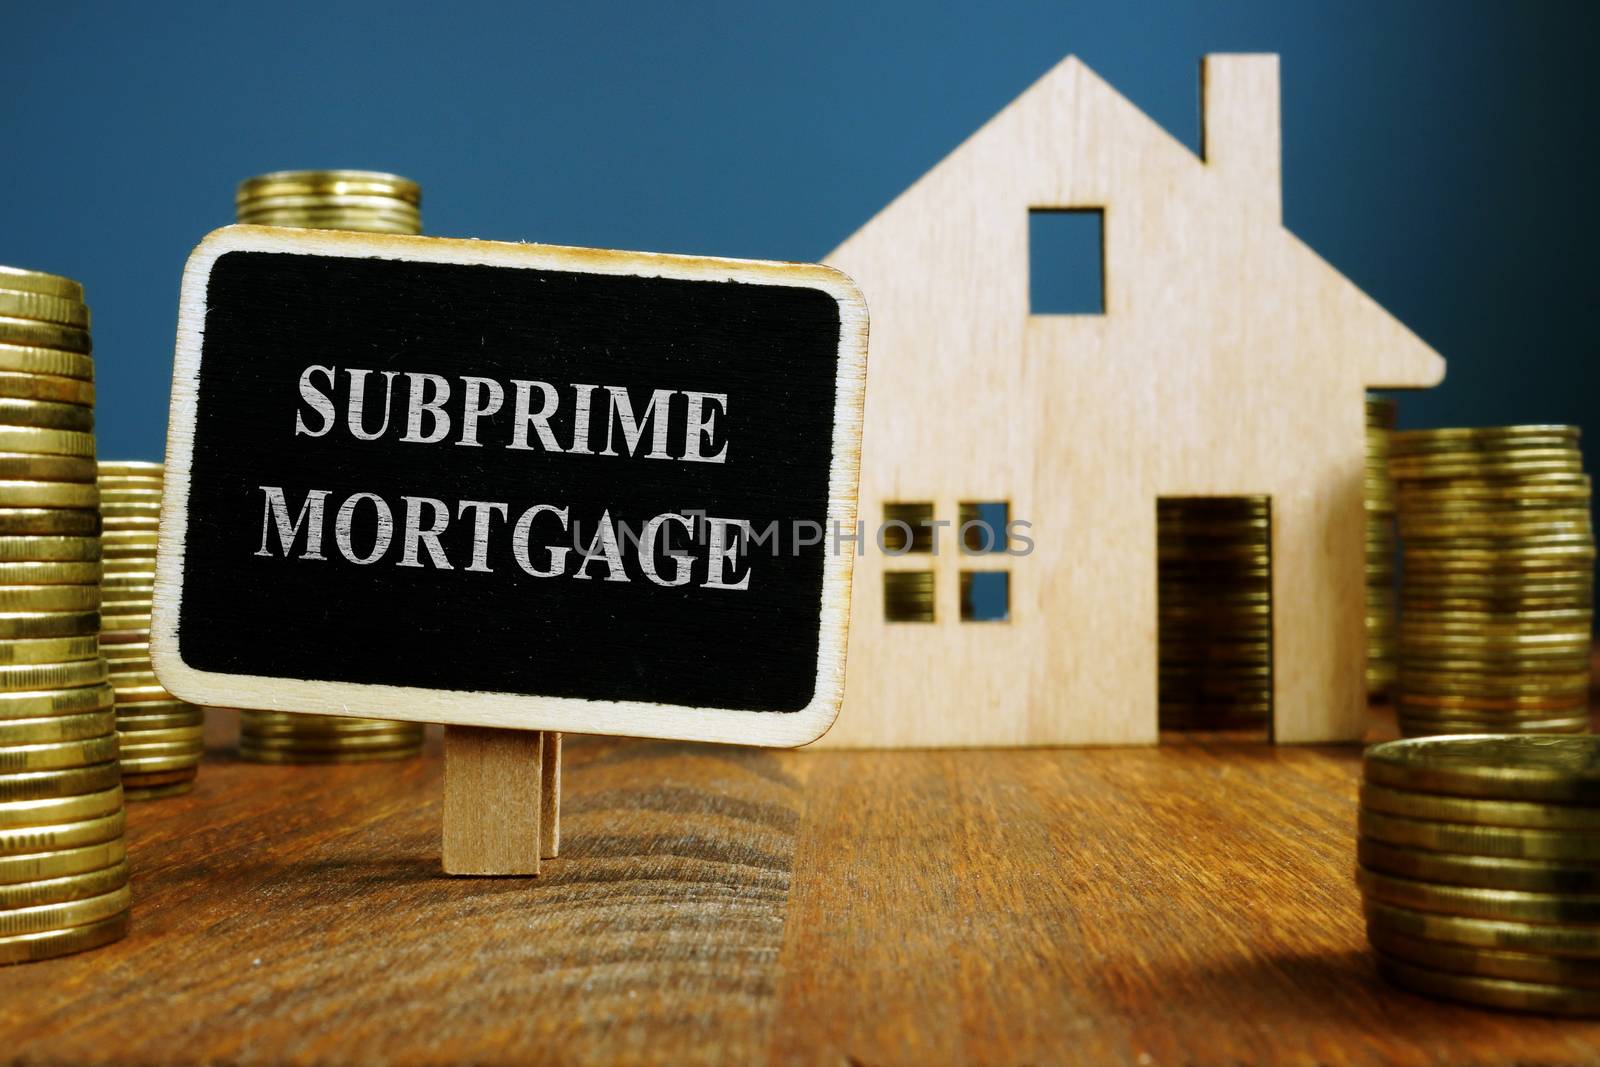 Subprime mortgage plate and model of home.